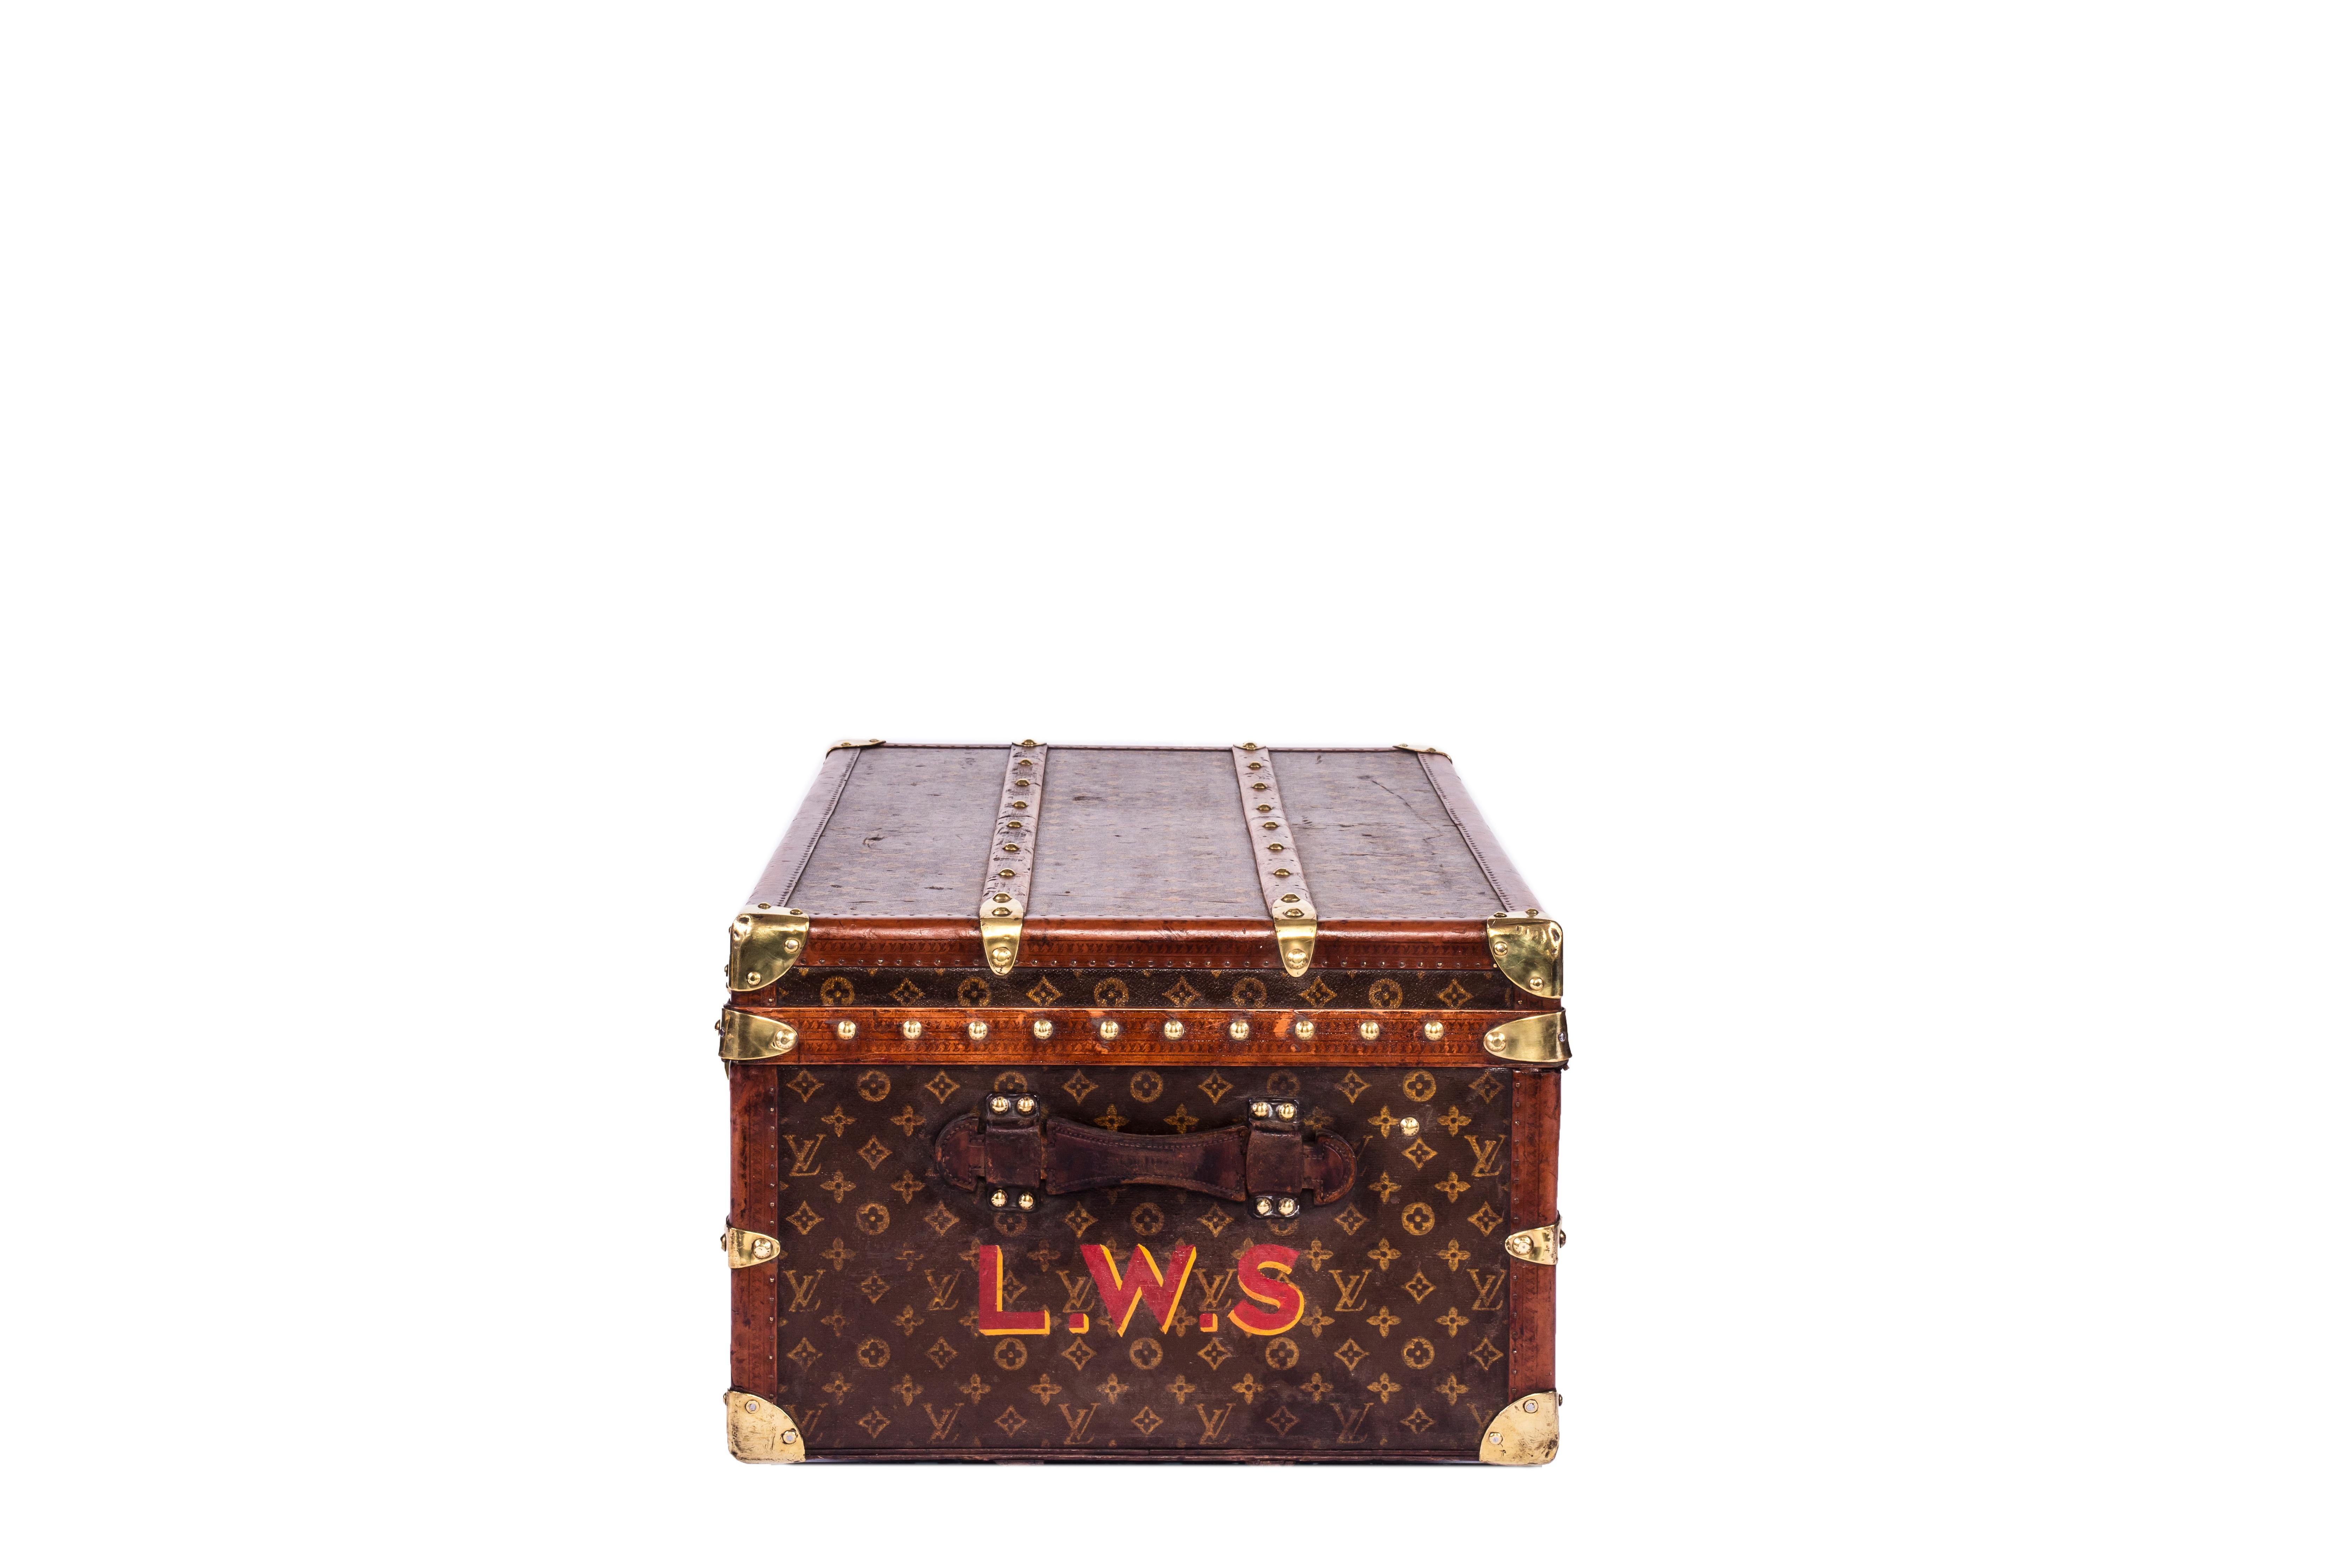 A beautiful cabin trunk that is entirely covered signature stencil monogrammed canvas from Louis Vuitton circa 1930s. 

It features:
- Lozine trim, 
- Wooden slats 
- Brass hardware. 

Original owner’s initials are painted on the side